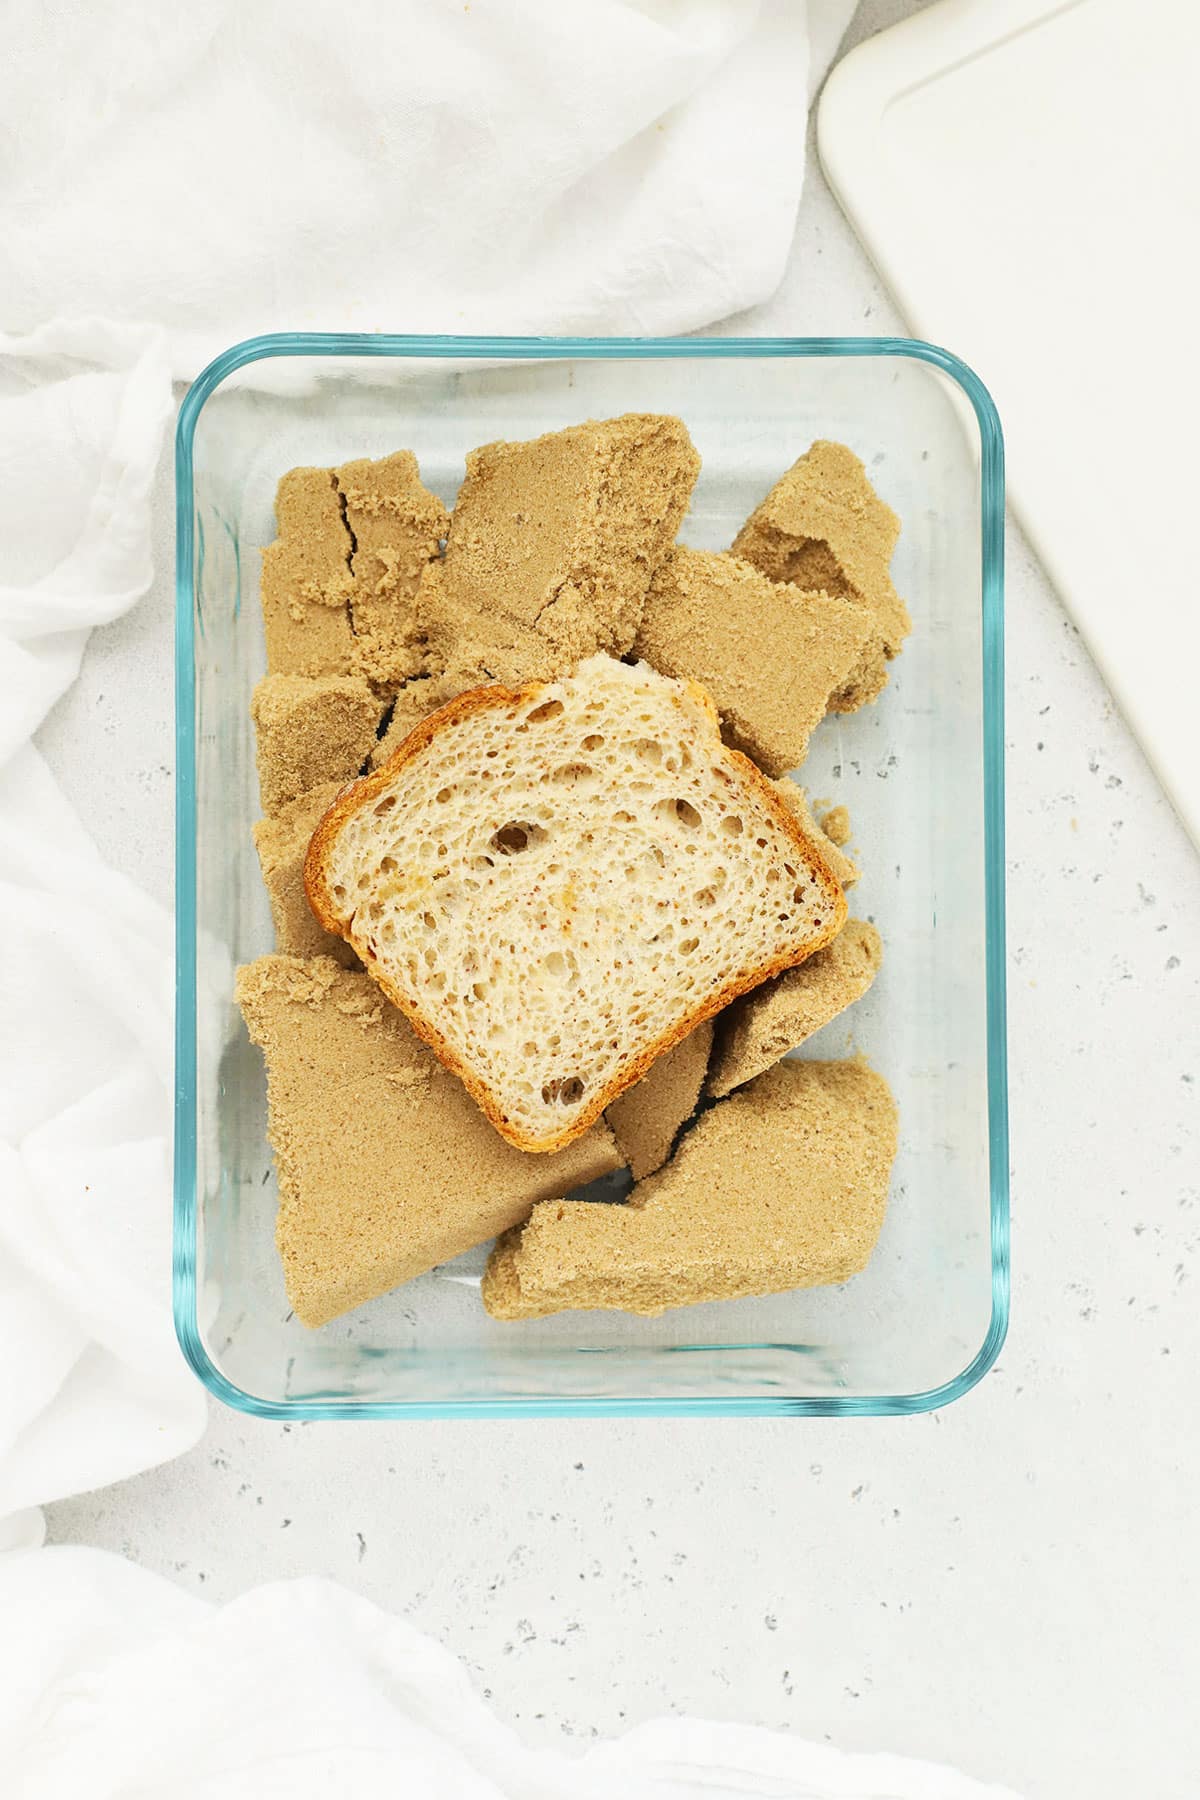 Softening brown sugar with a slice of gluten-free bread